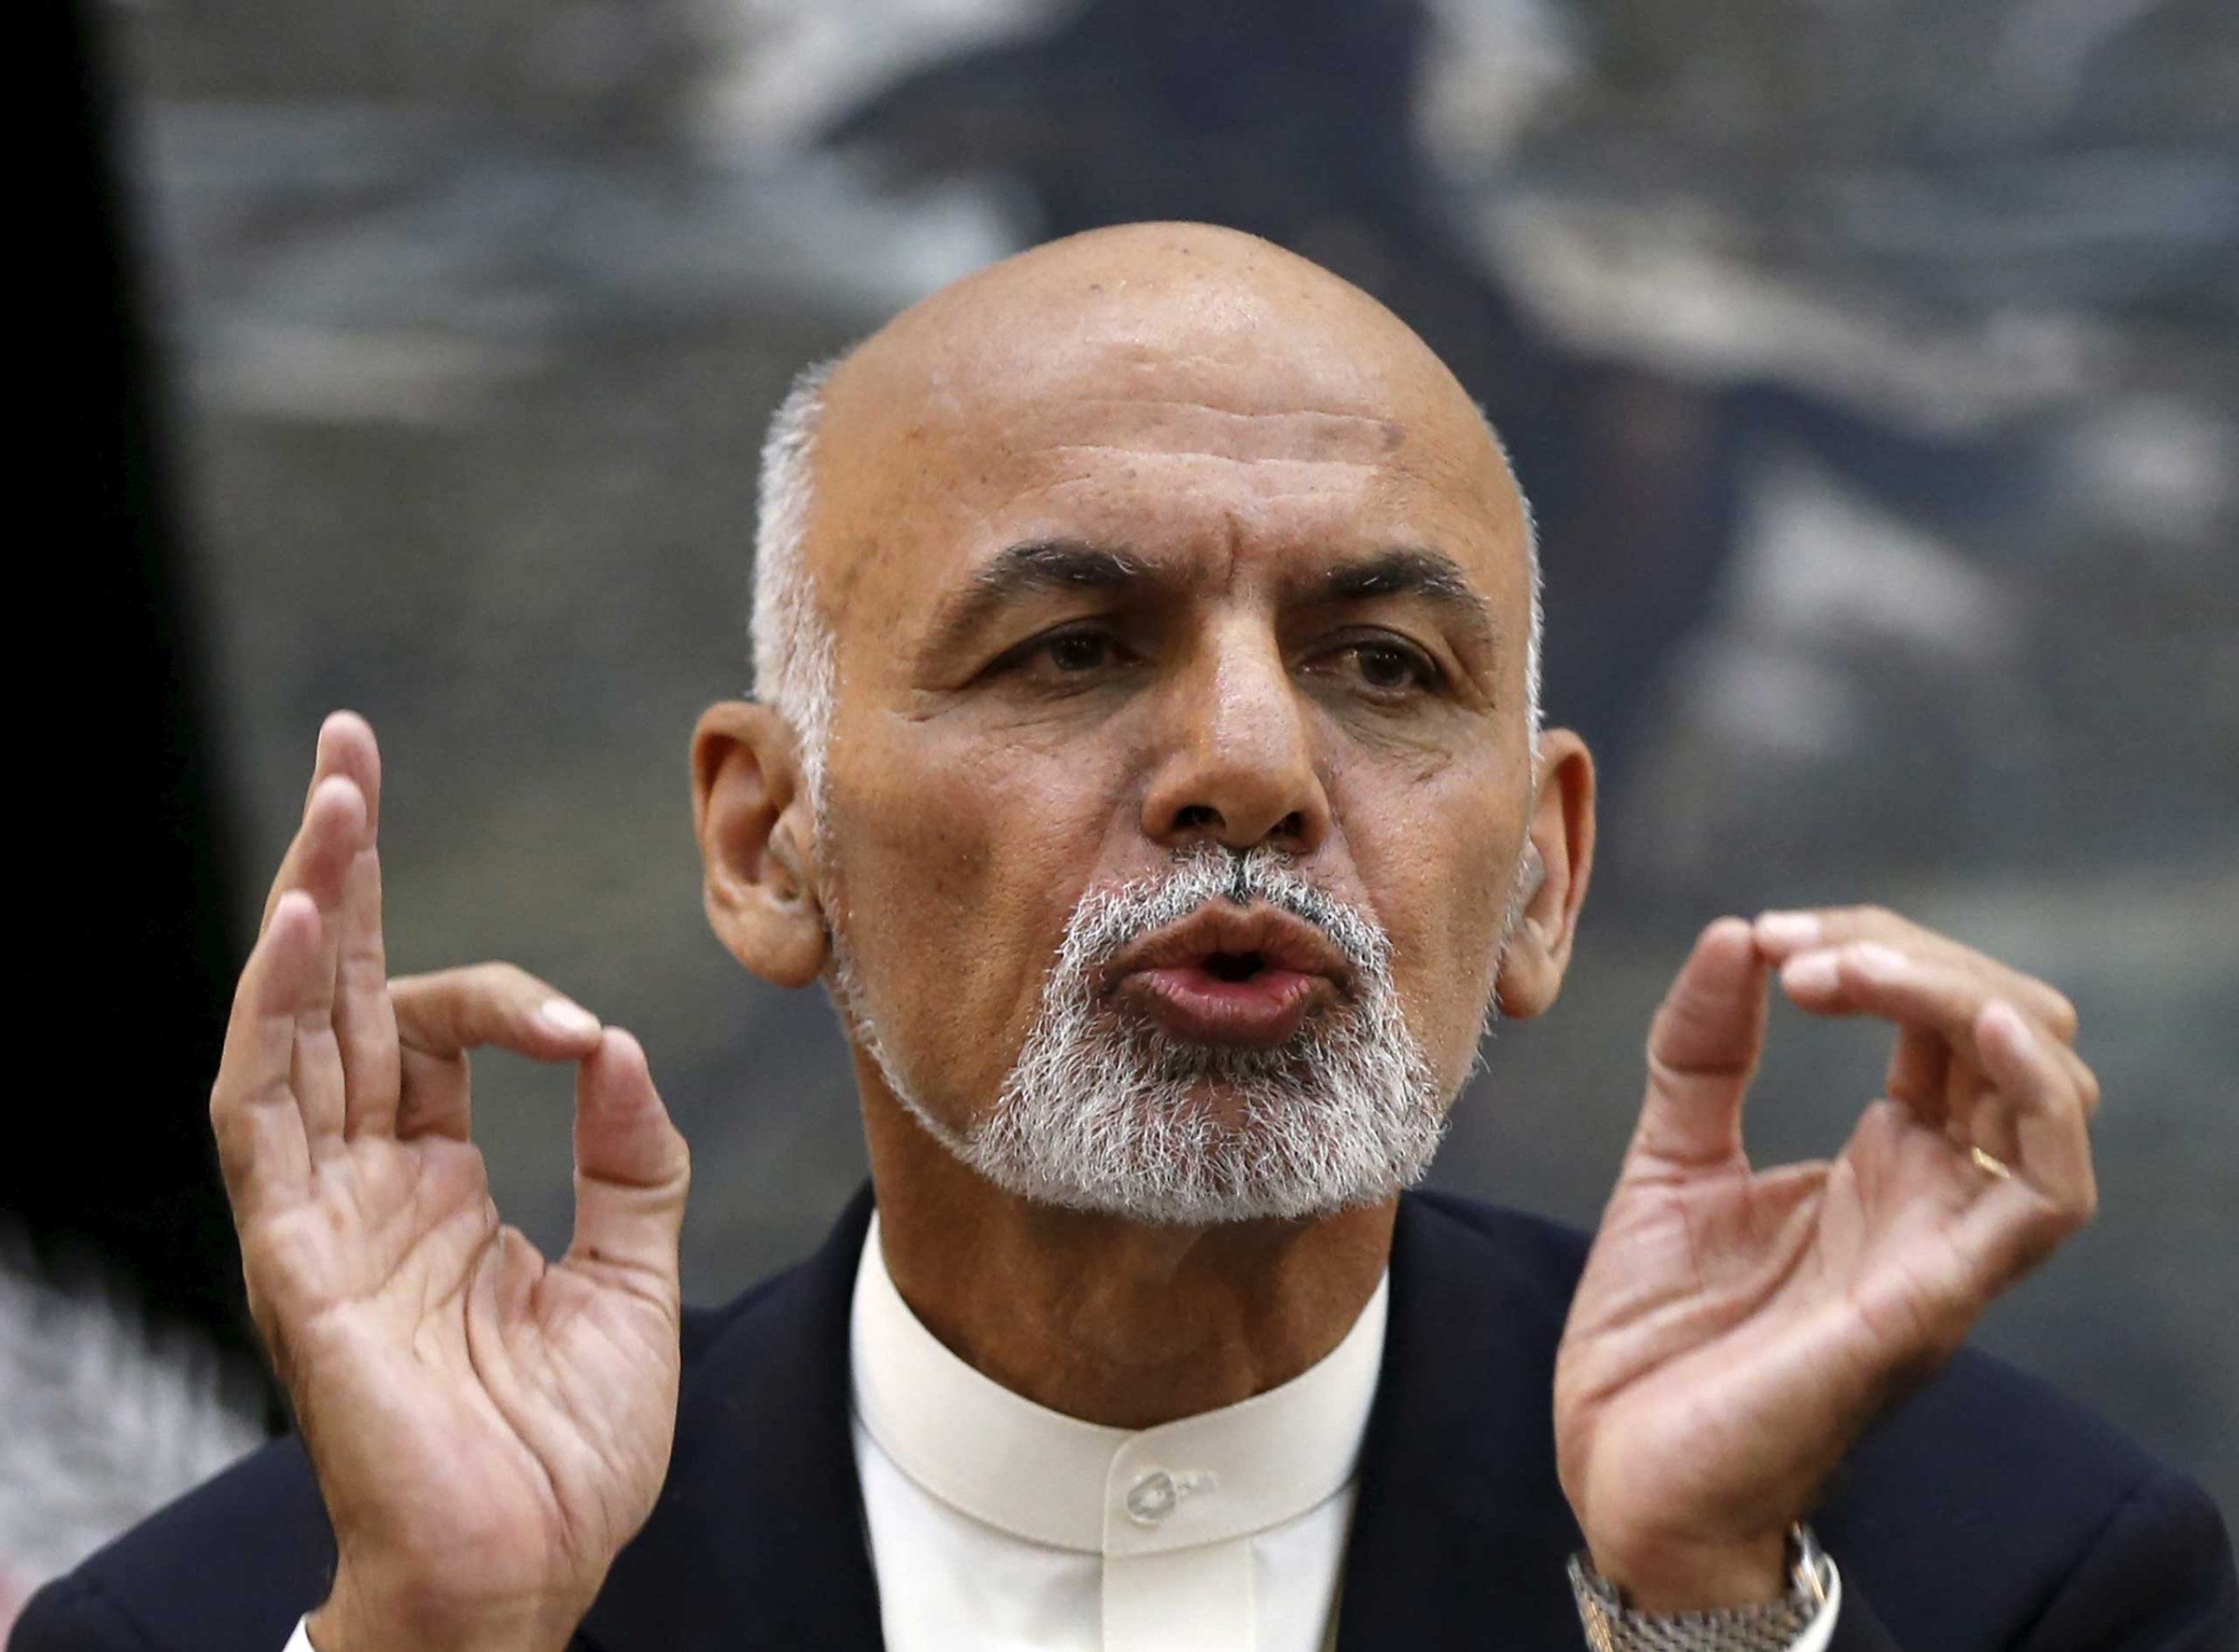 Afghanistan's President Ashraf Ghani speaks during a news conference in Kabul